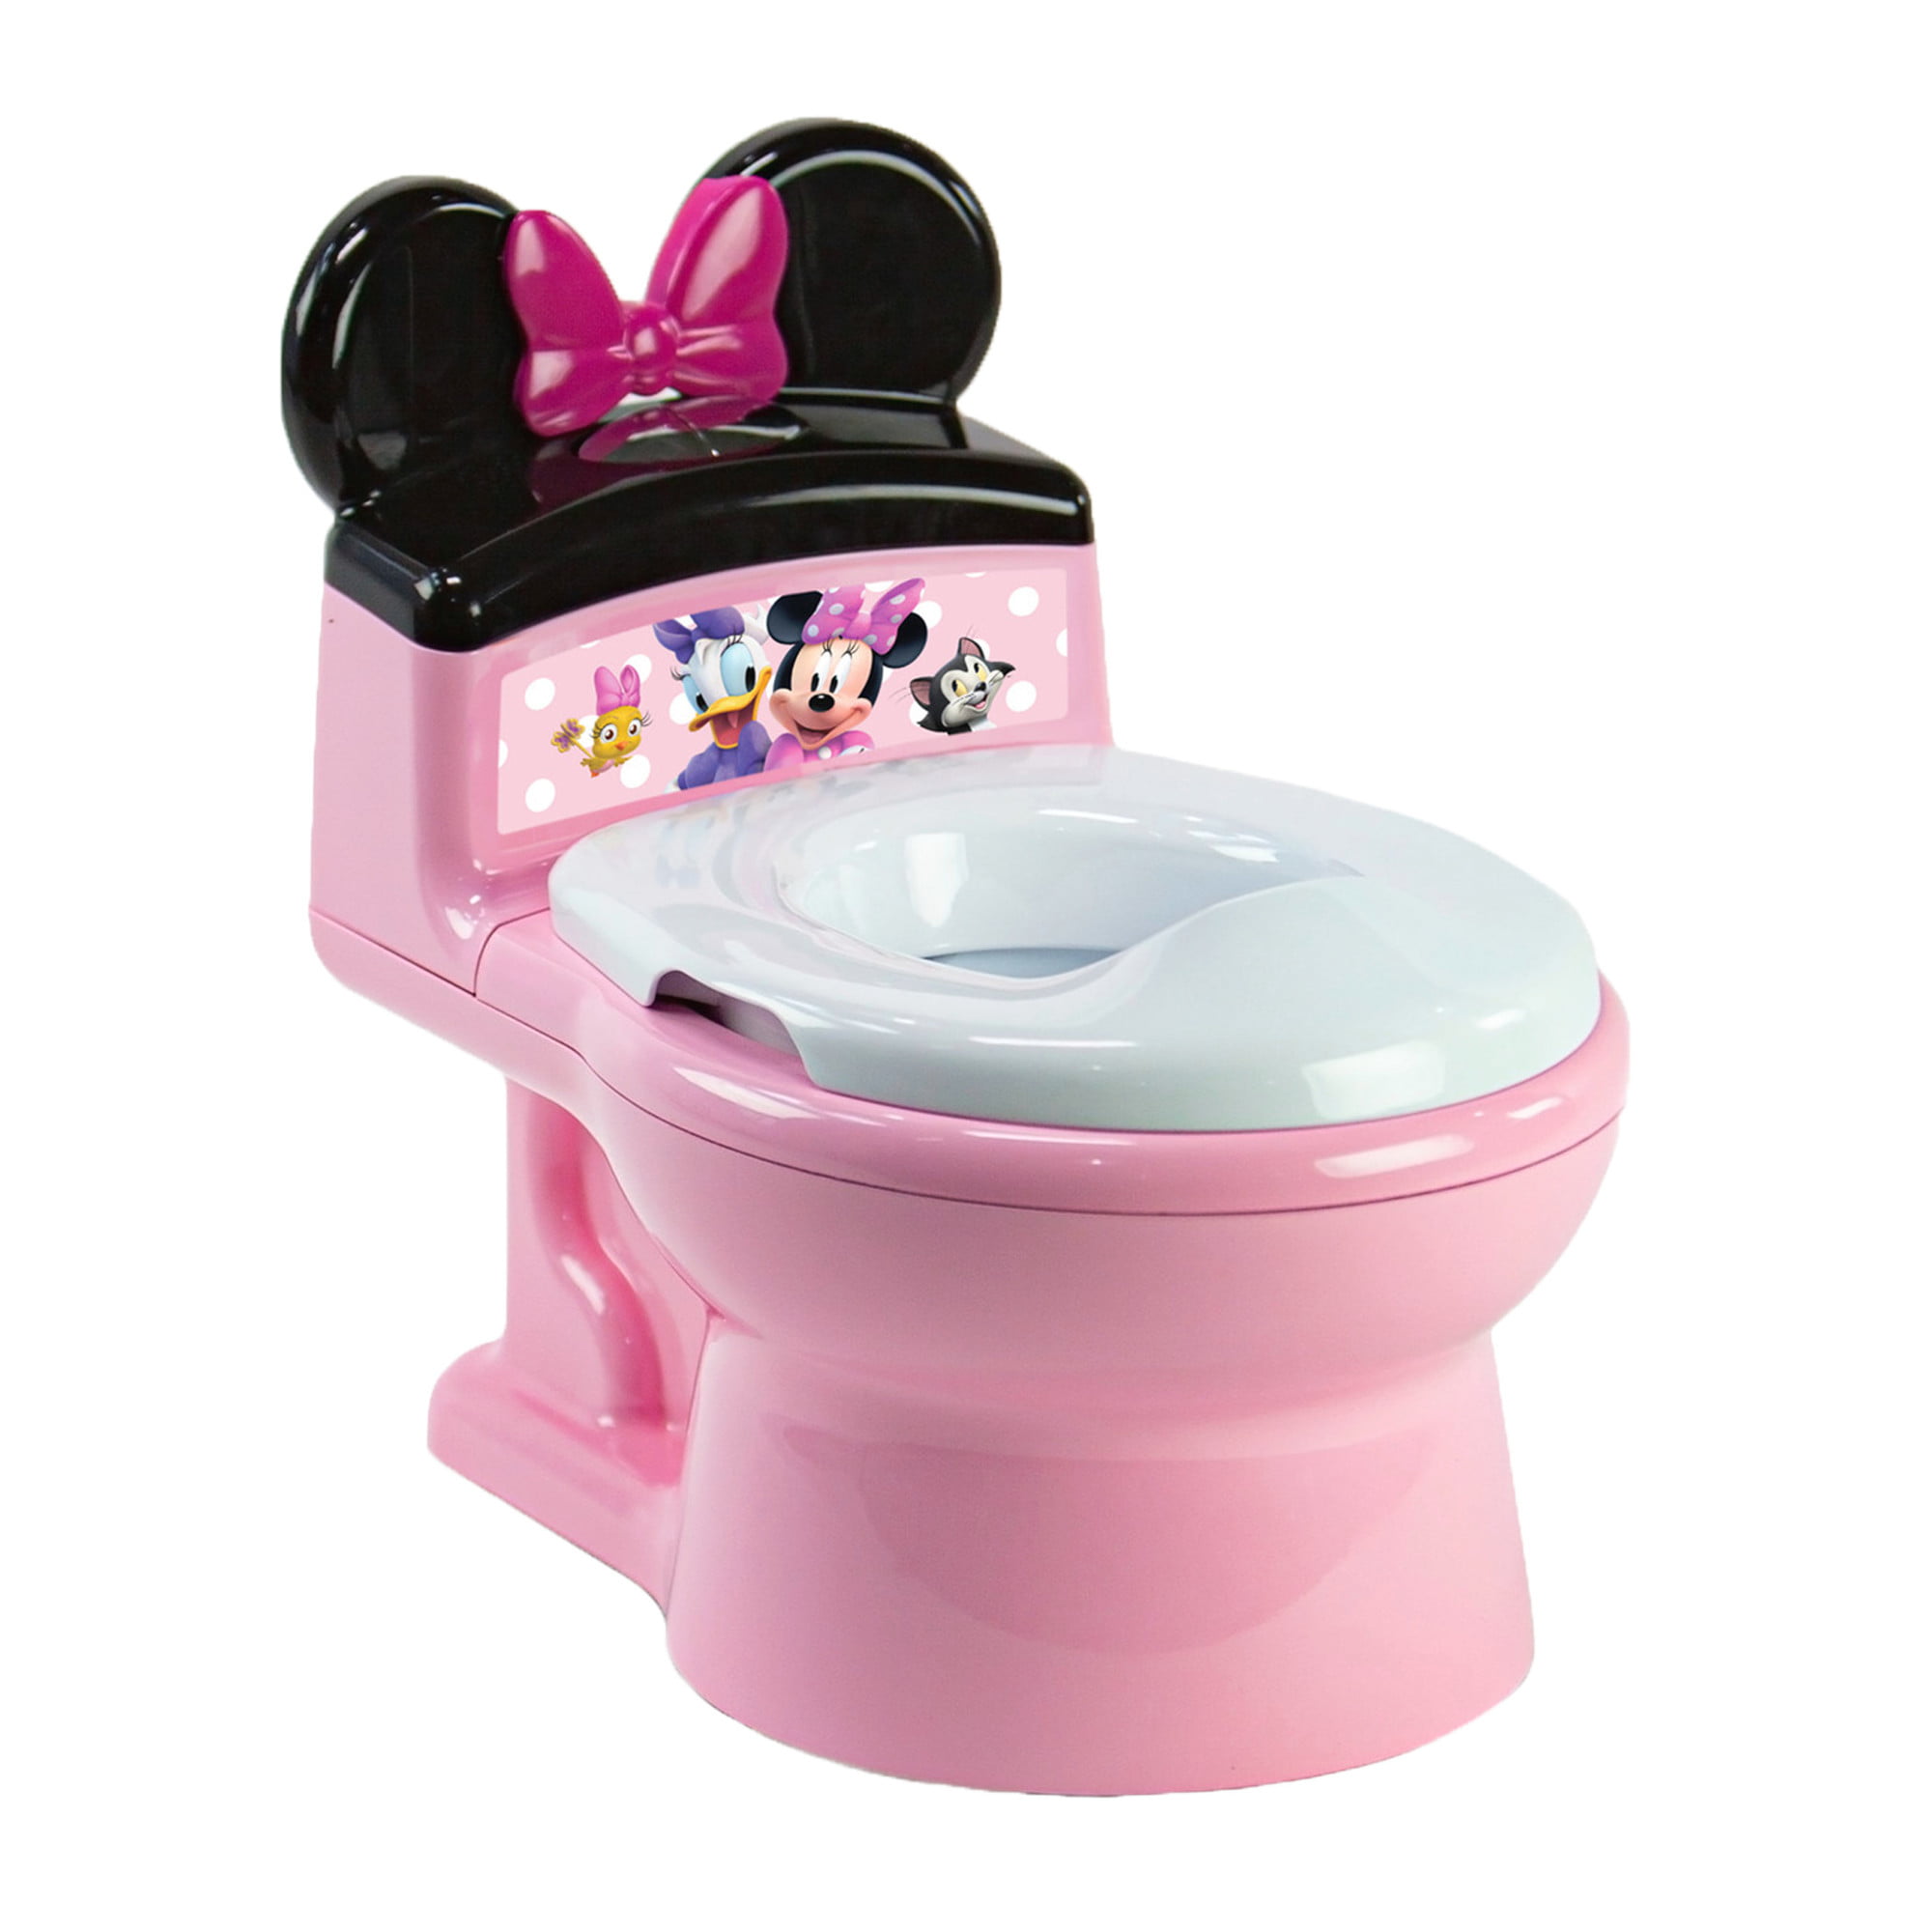 walmart potty chair for adults